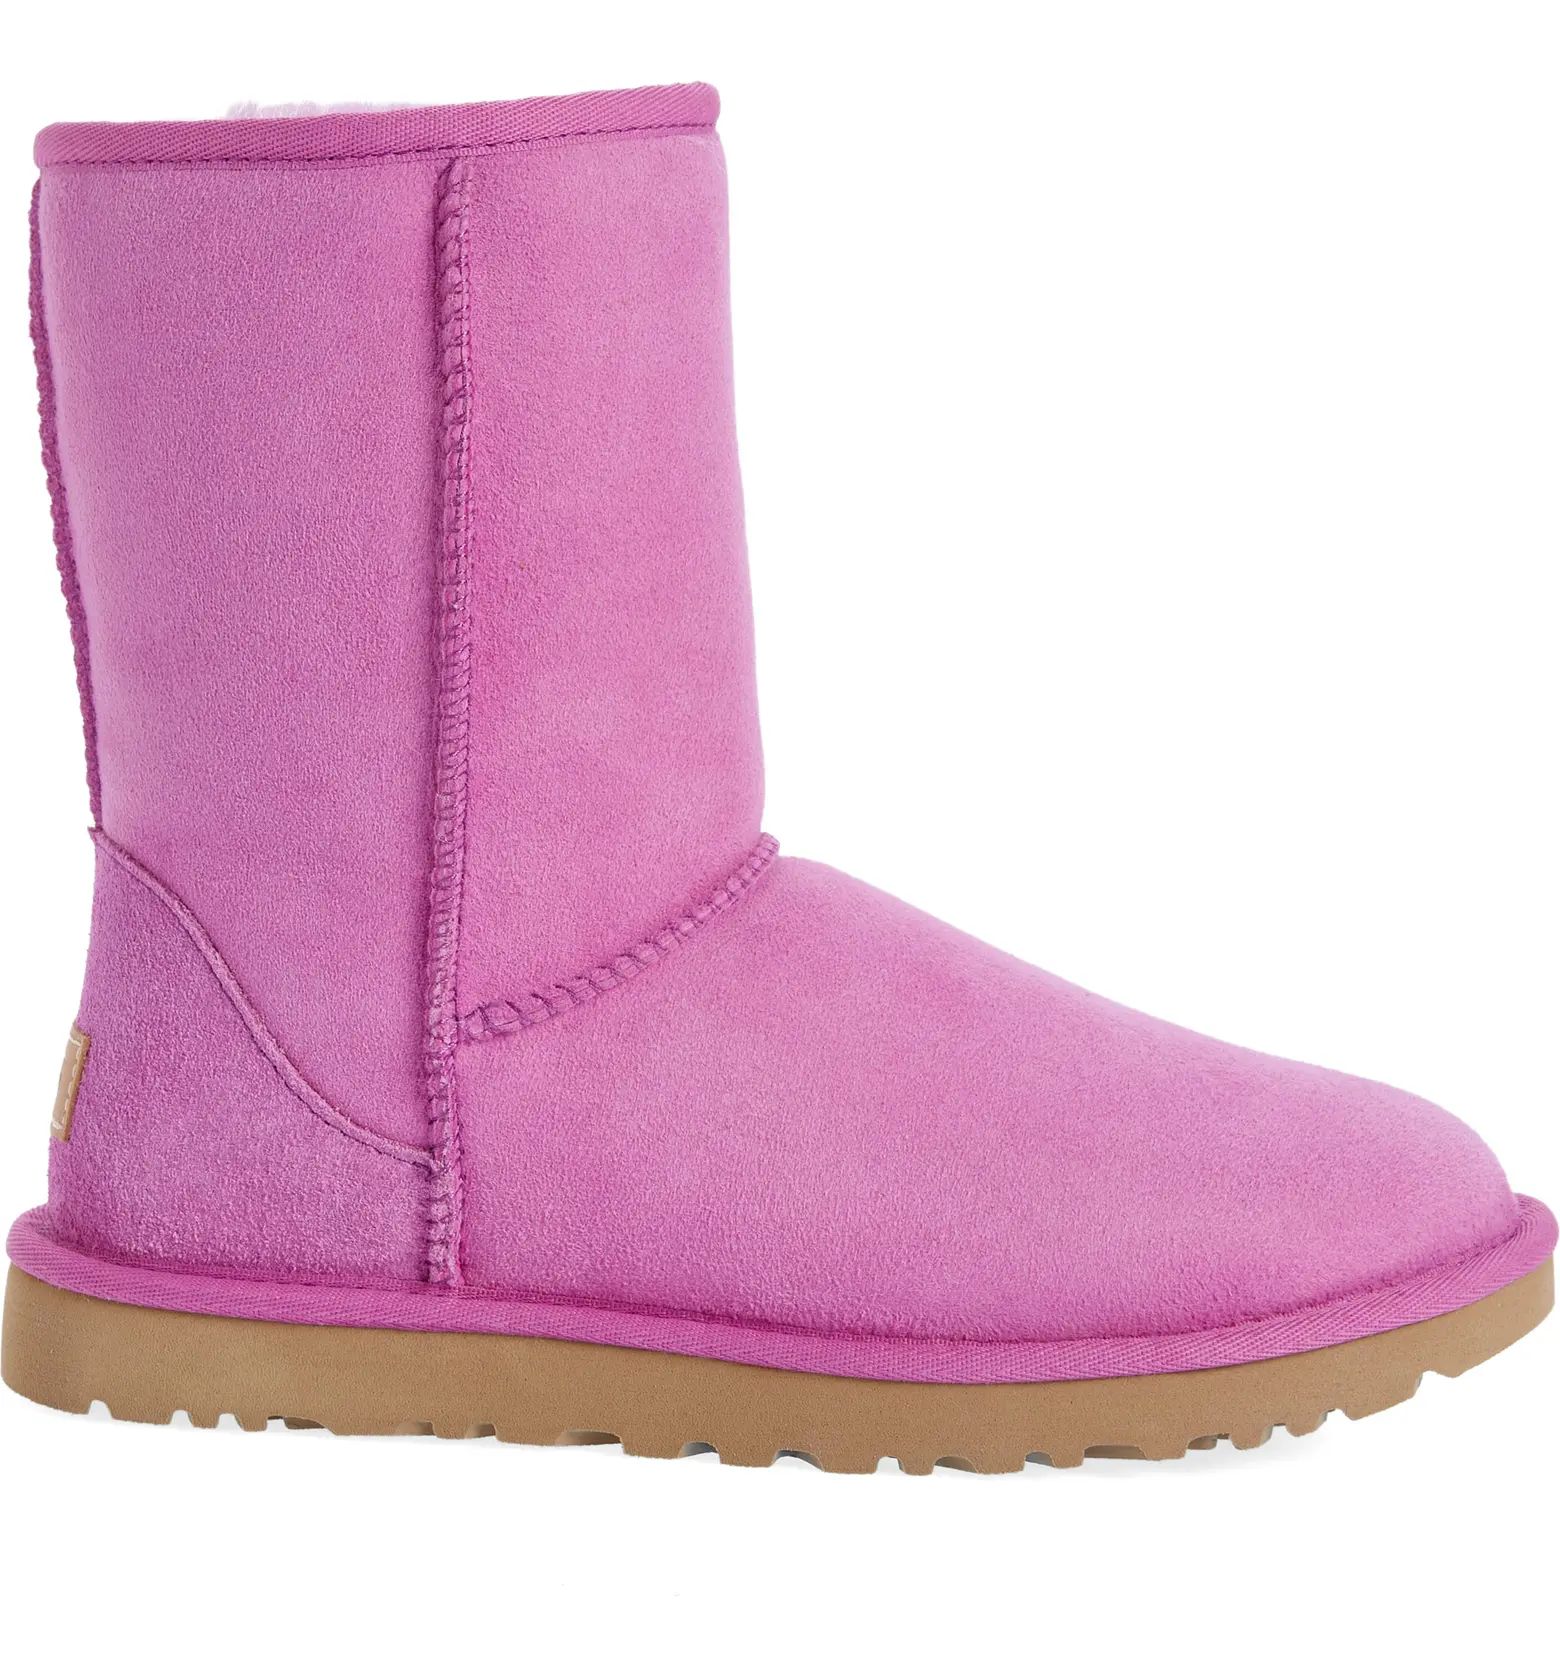 UGG® Classic II Genuine Shearling Lined Short Boot | Nordstrom | Nordstrom